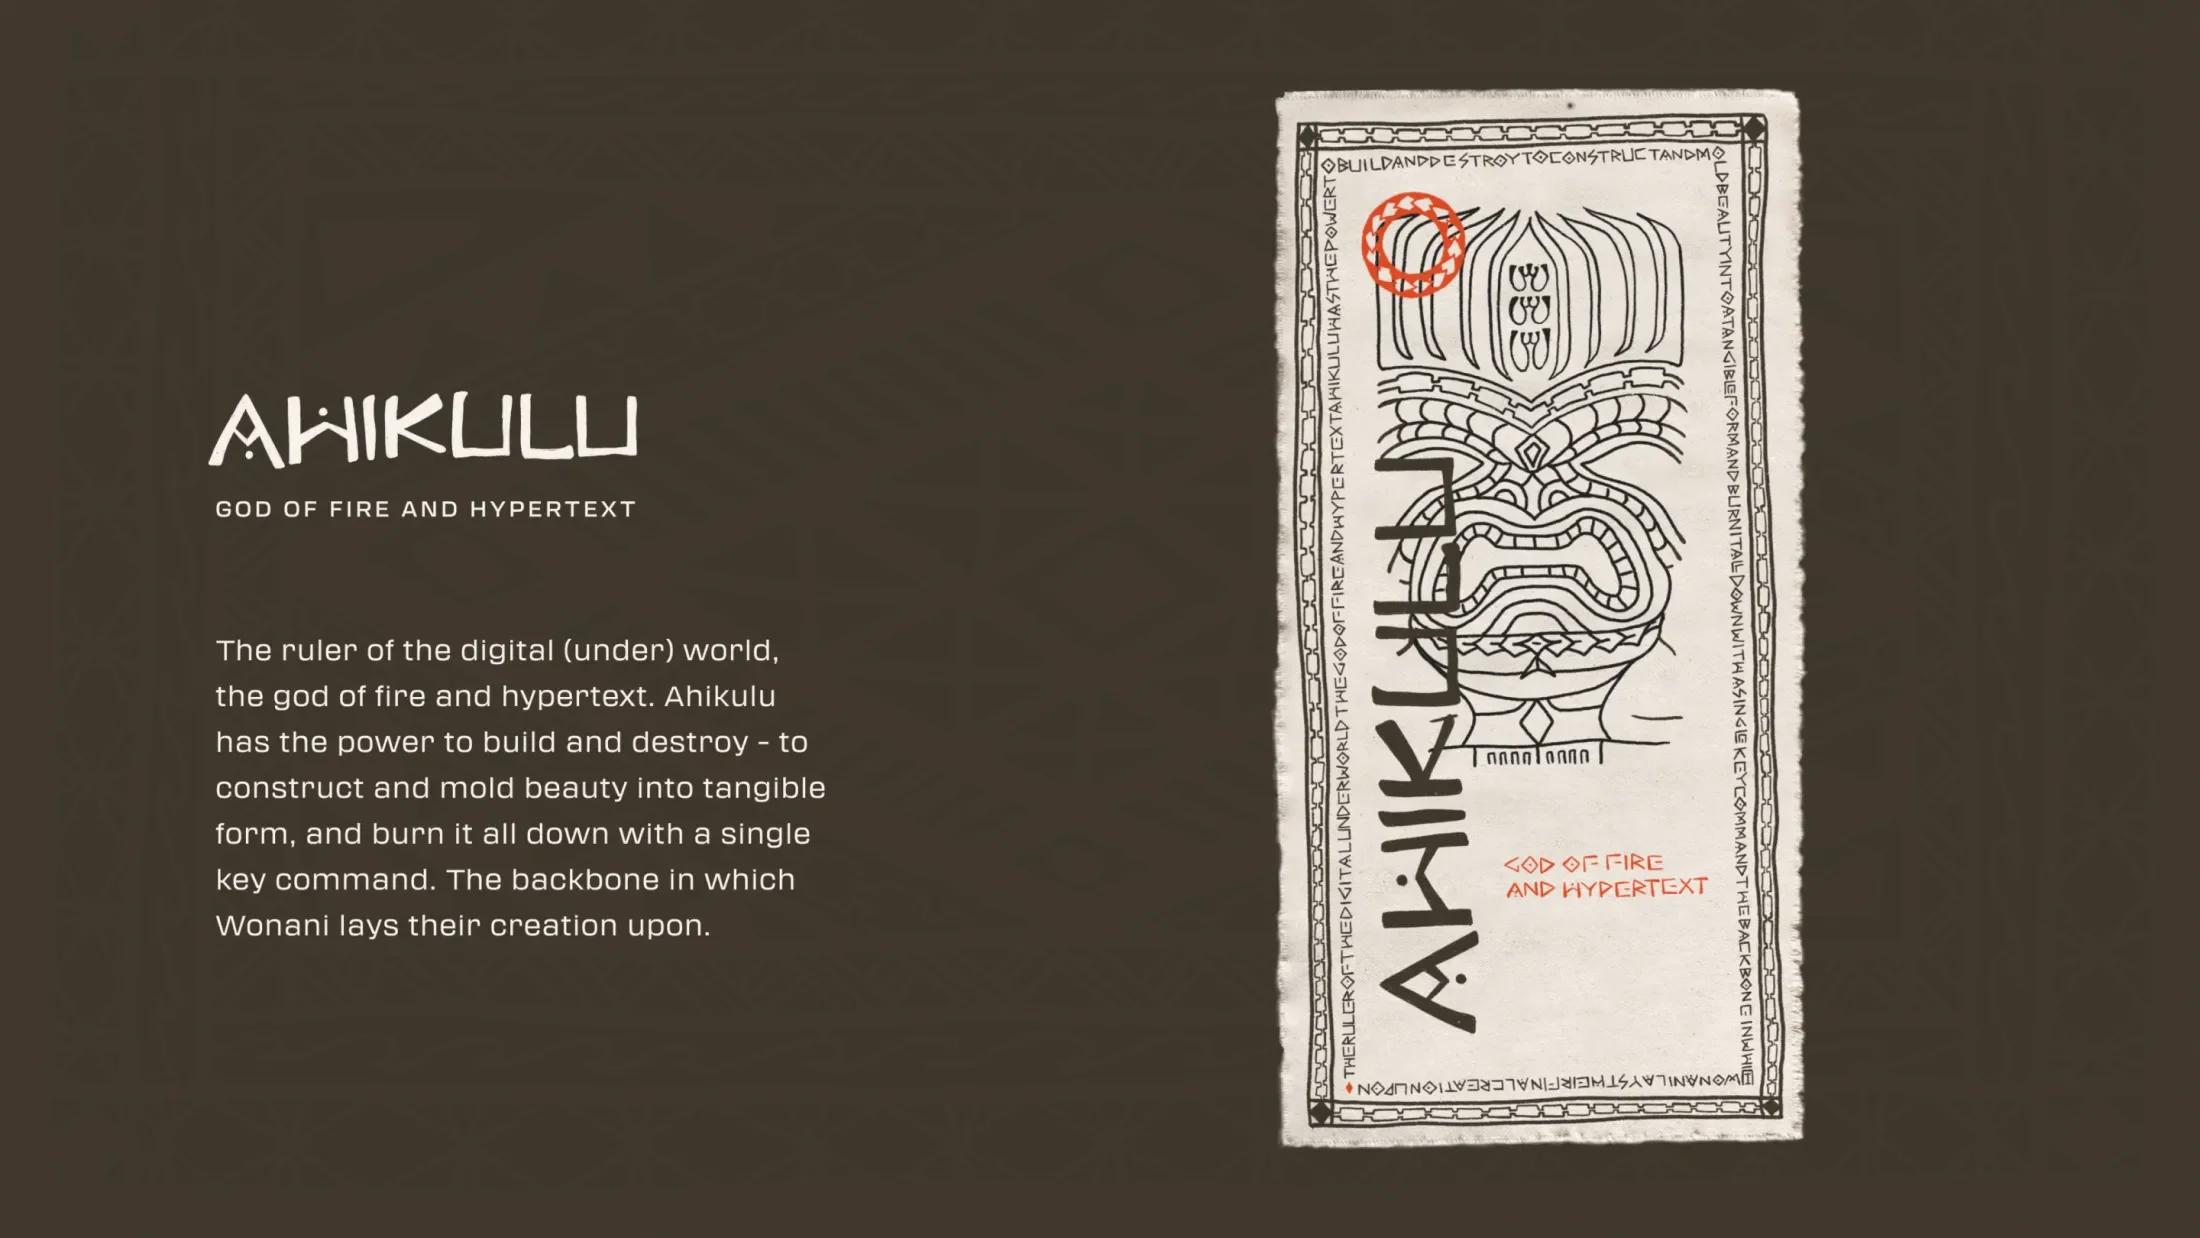 Illustration and description for the tiki Ahikulu, God of Fire and Hypertext